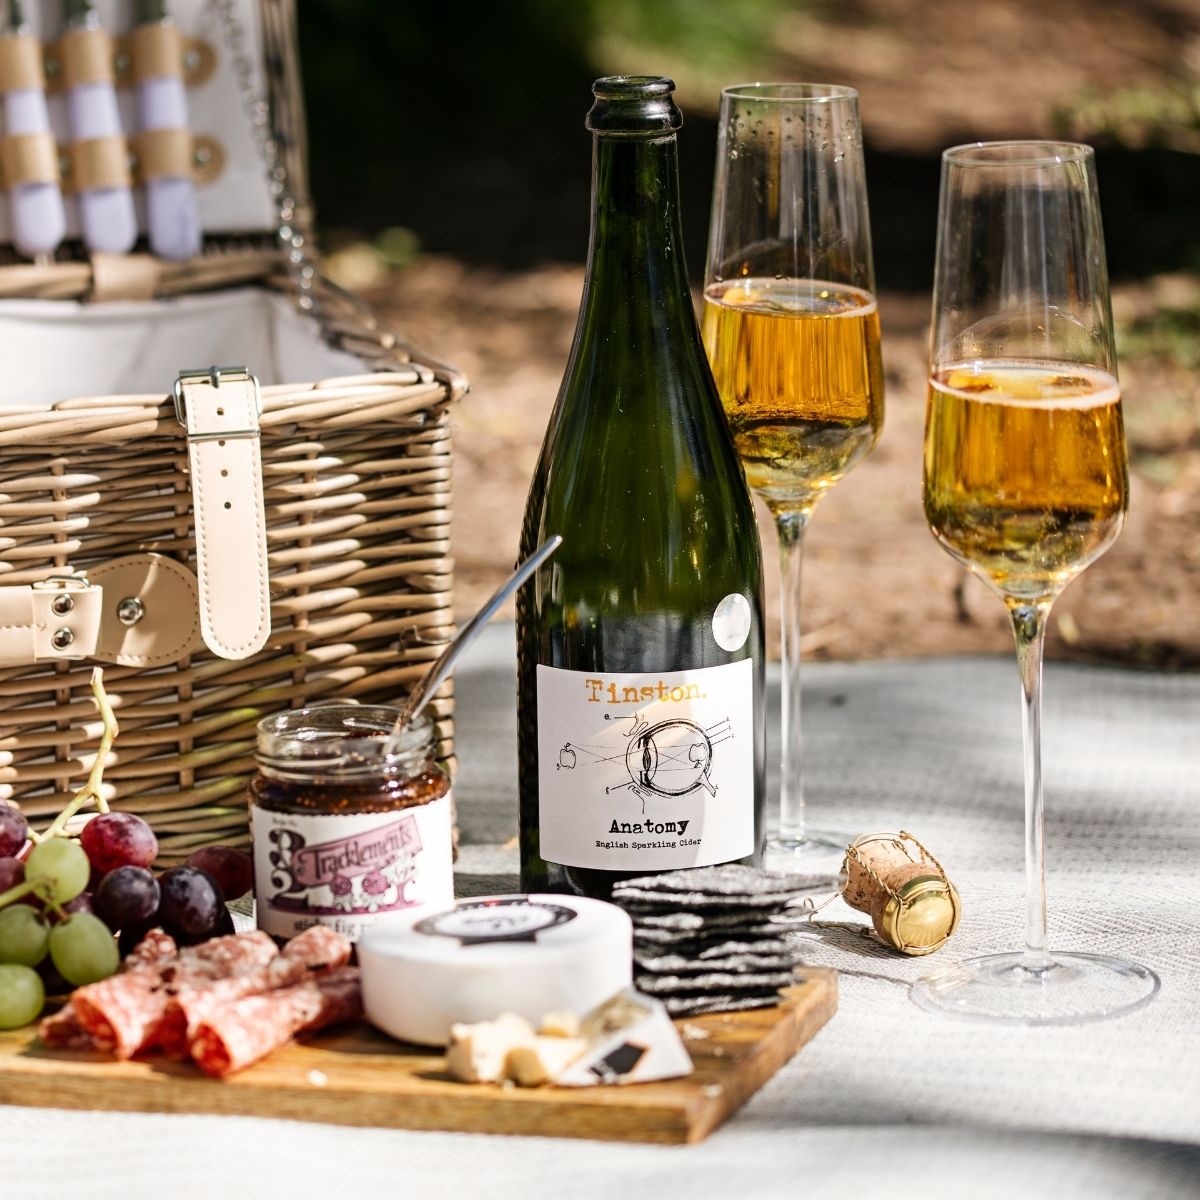 A Picnic Hamper with a bottle and glasses